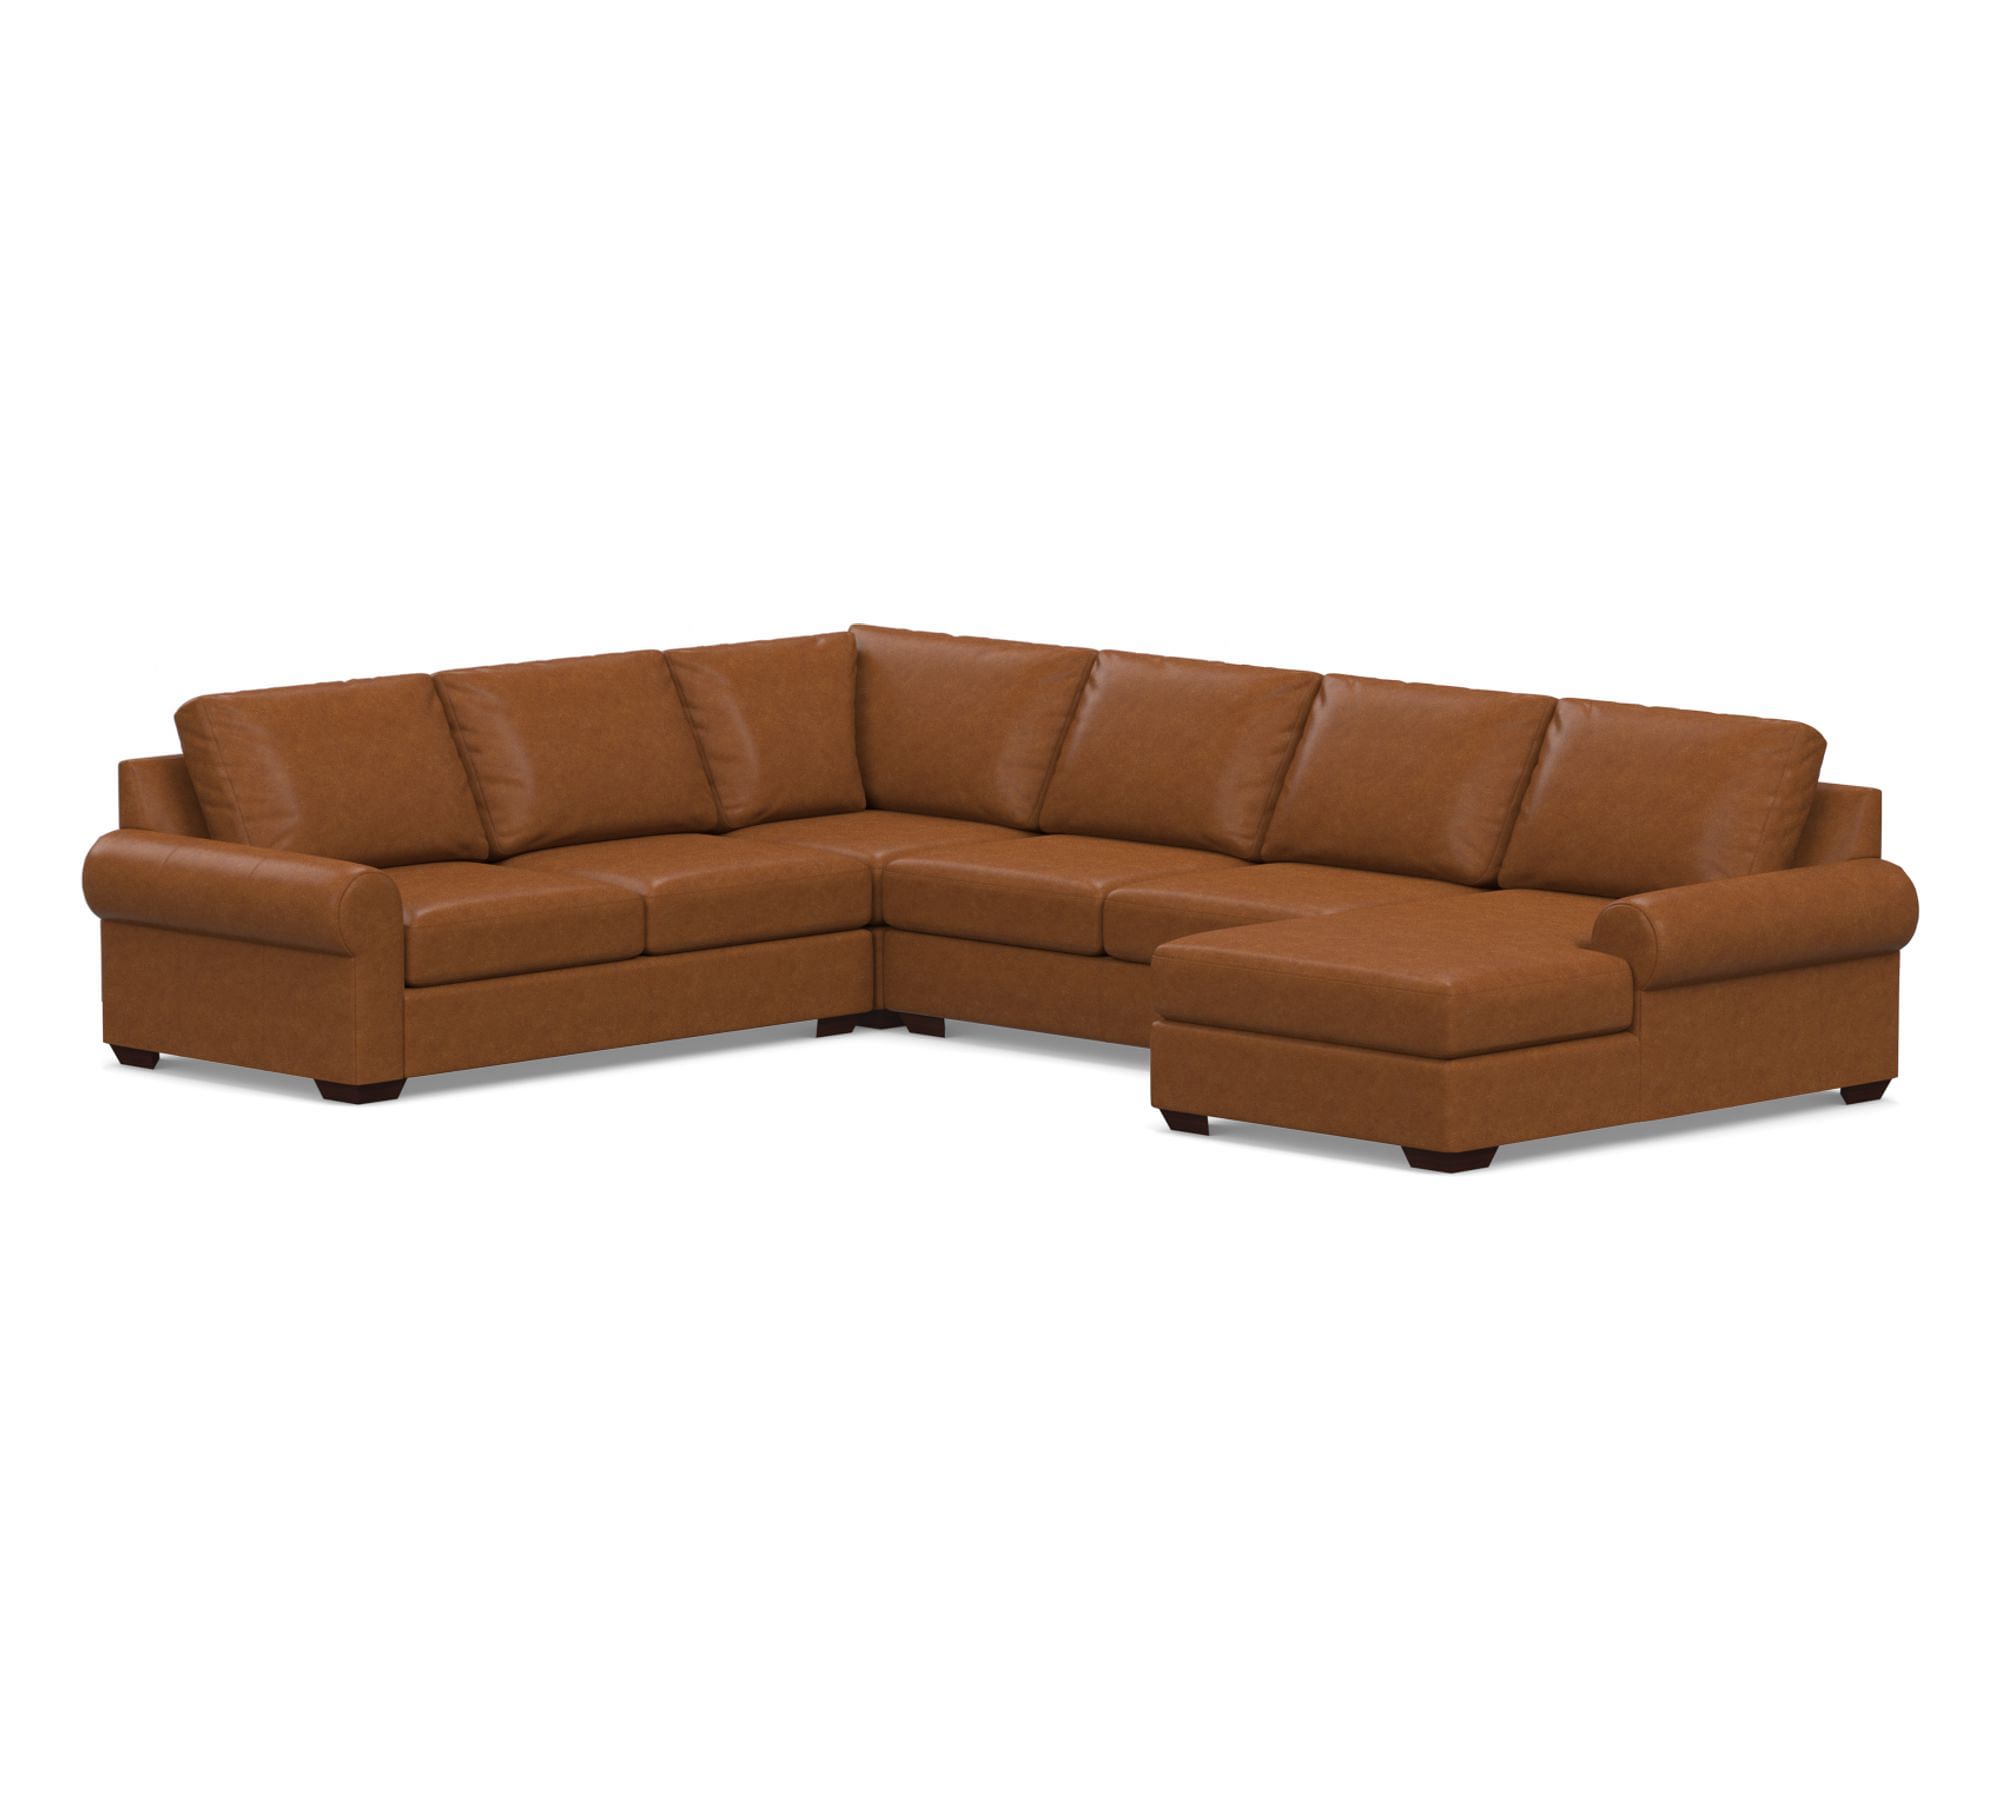 Big Sur Roll Arm Leather 4-Piece Chaise Sectional (147")